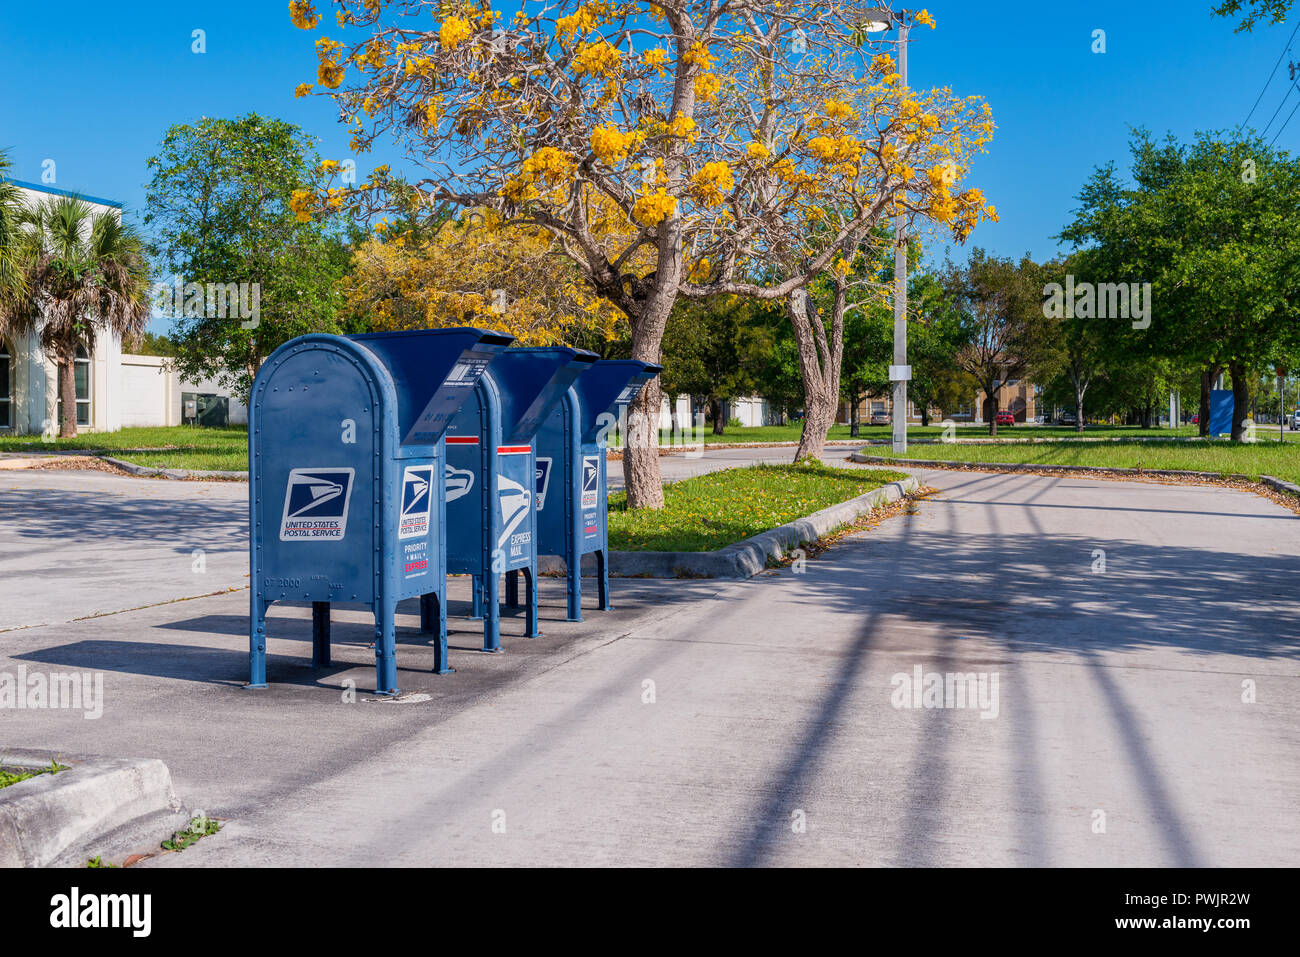 USPS Mail Boxes along the road in Florida City, Florida, USA. USPS, or US Mail, is responsible for providing postal service in the United States. Stock Photo